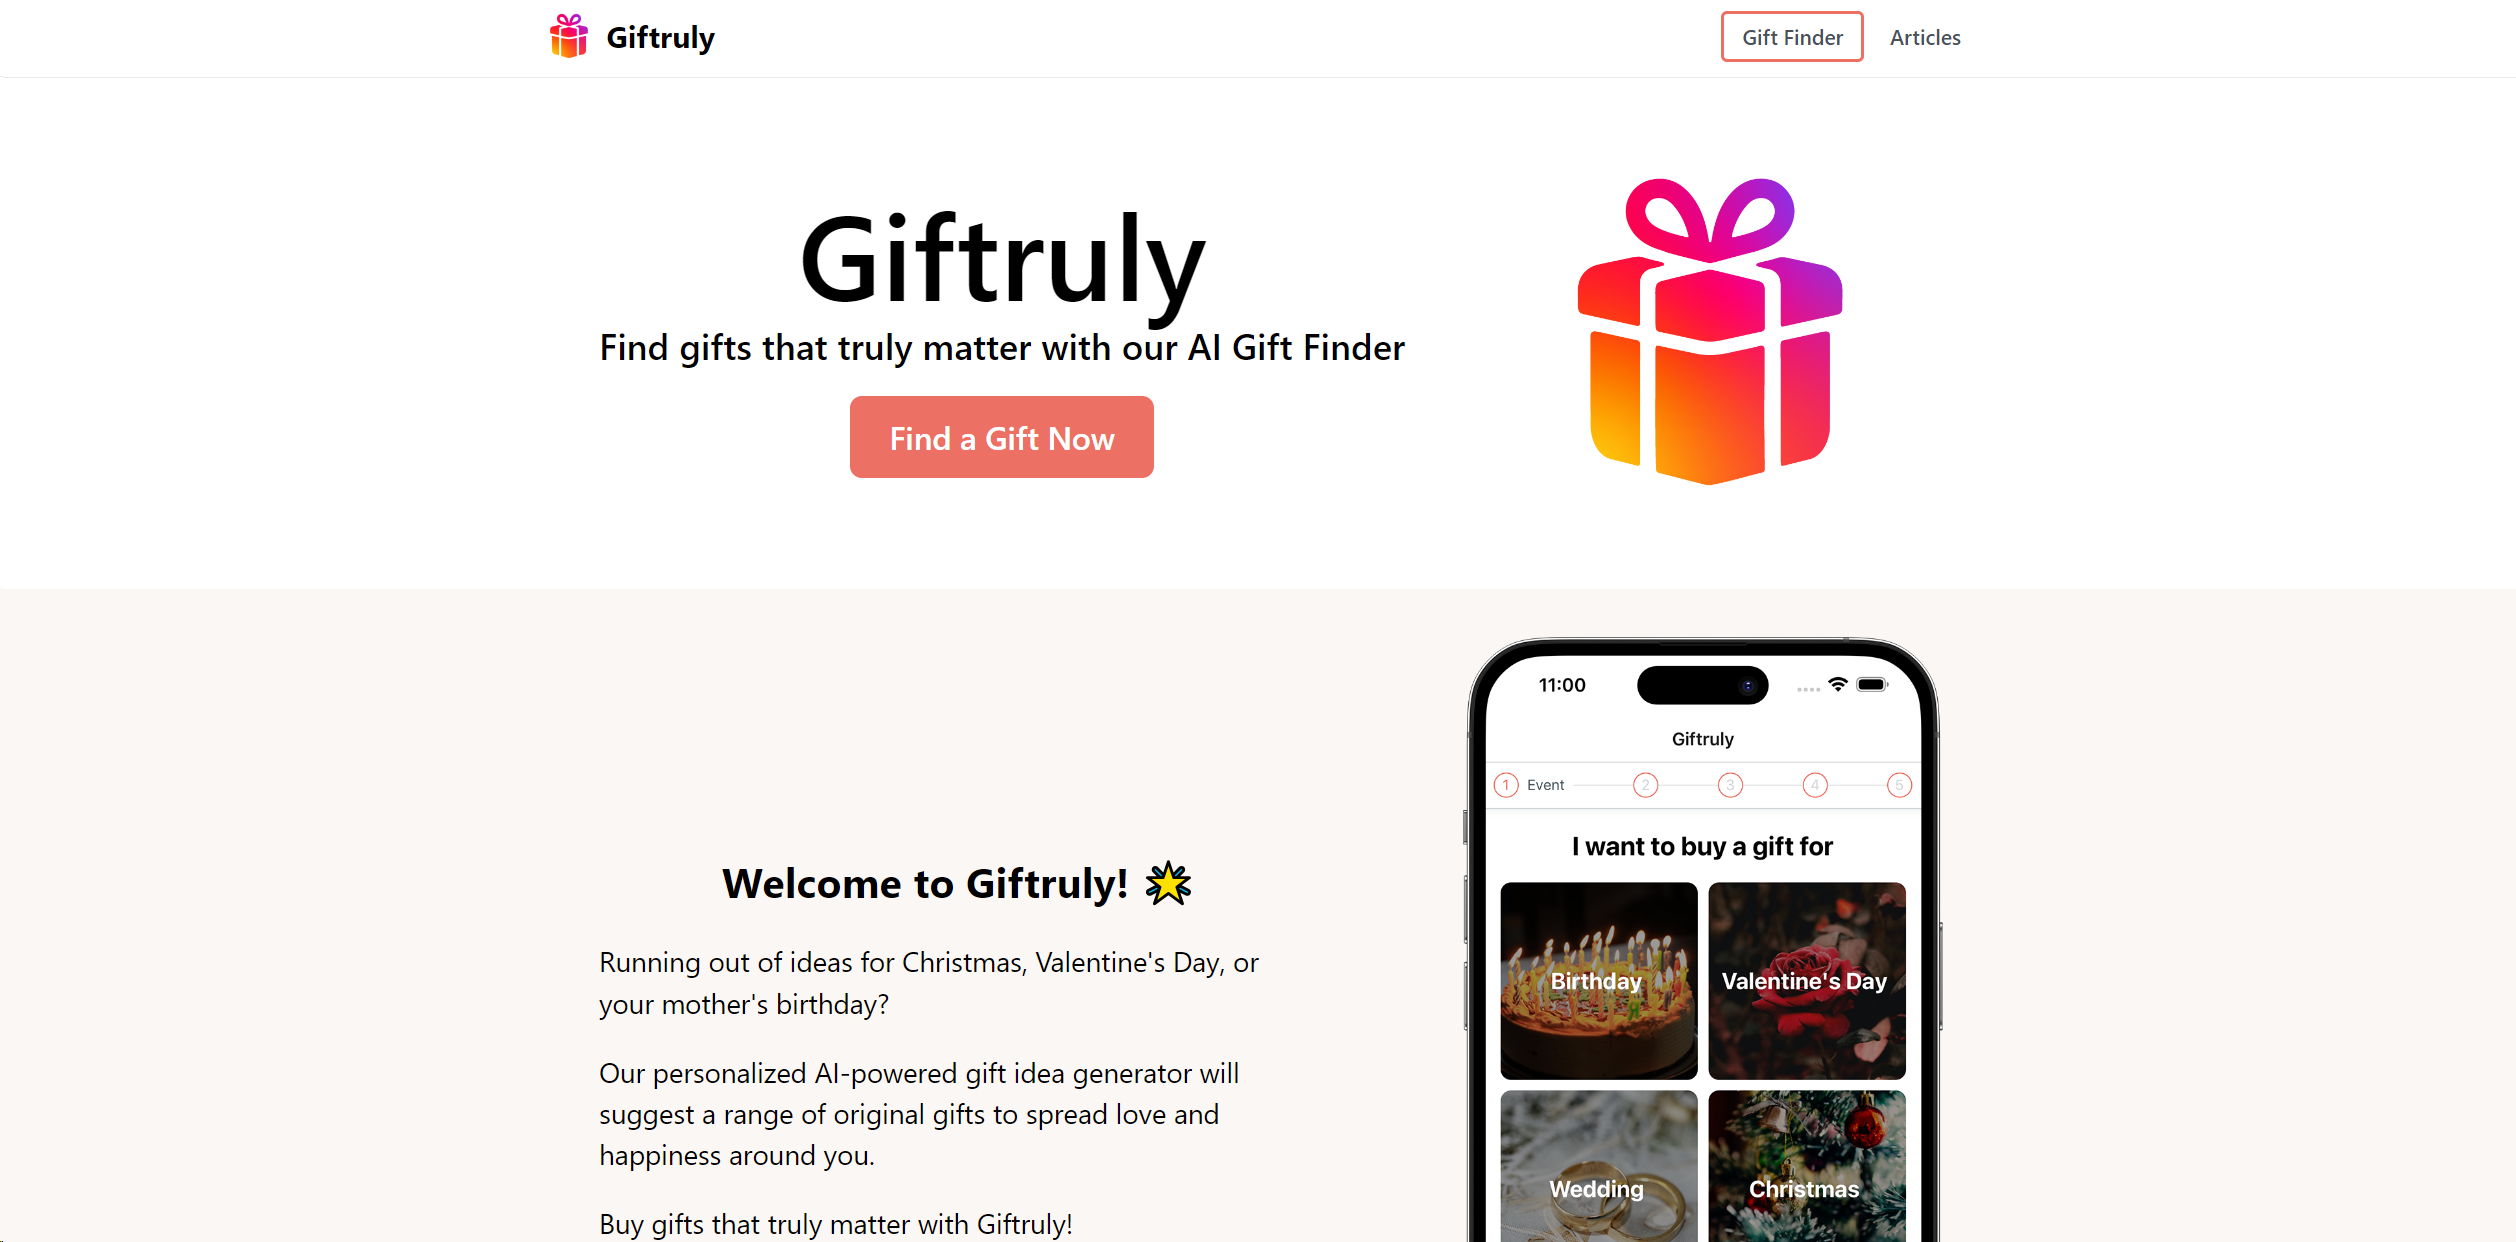 Giftruly